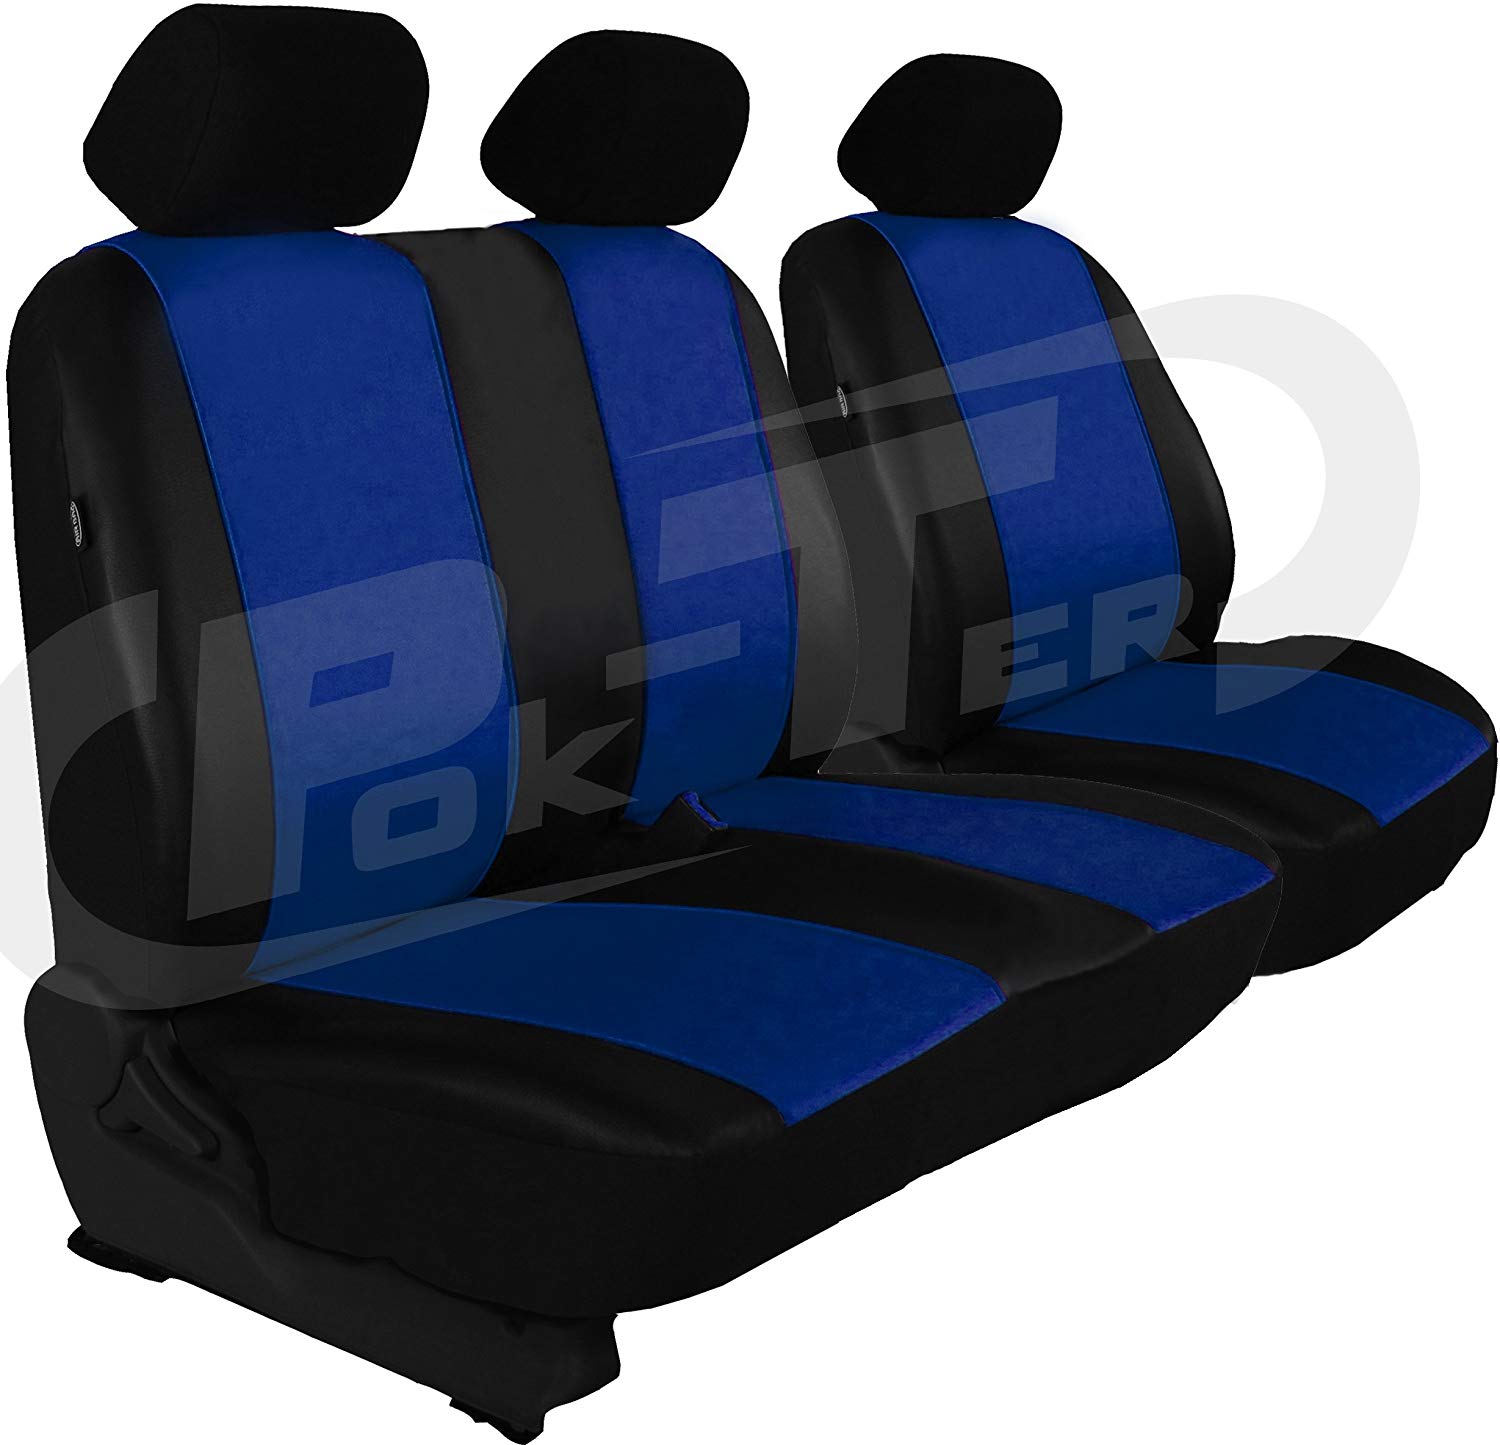 Customised Cover: Artificial Leather Fiat Talento 2016. Driver\'s Seat + 2 Passenger Bench. Colour: Blue.